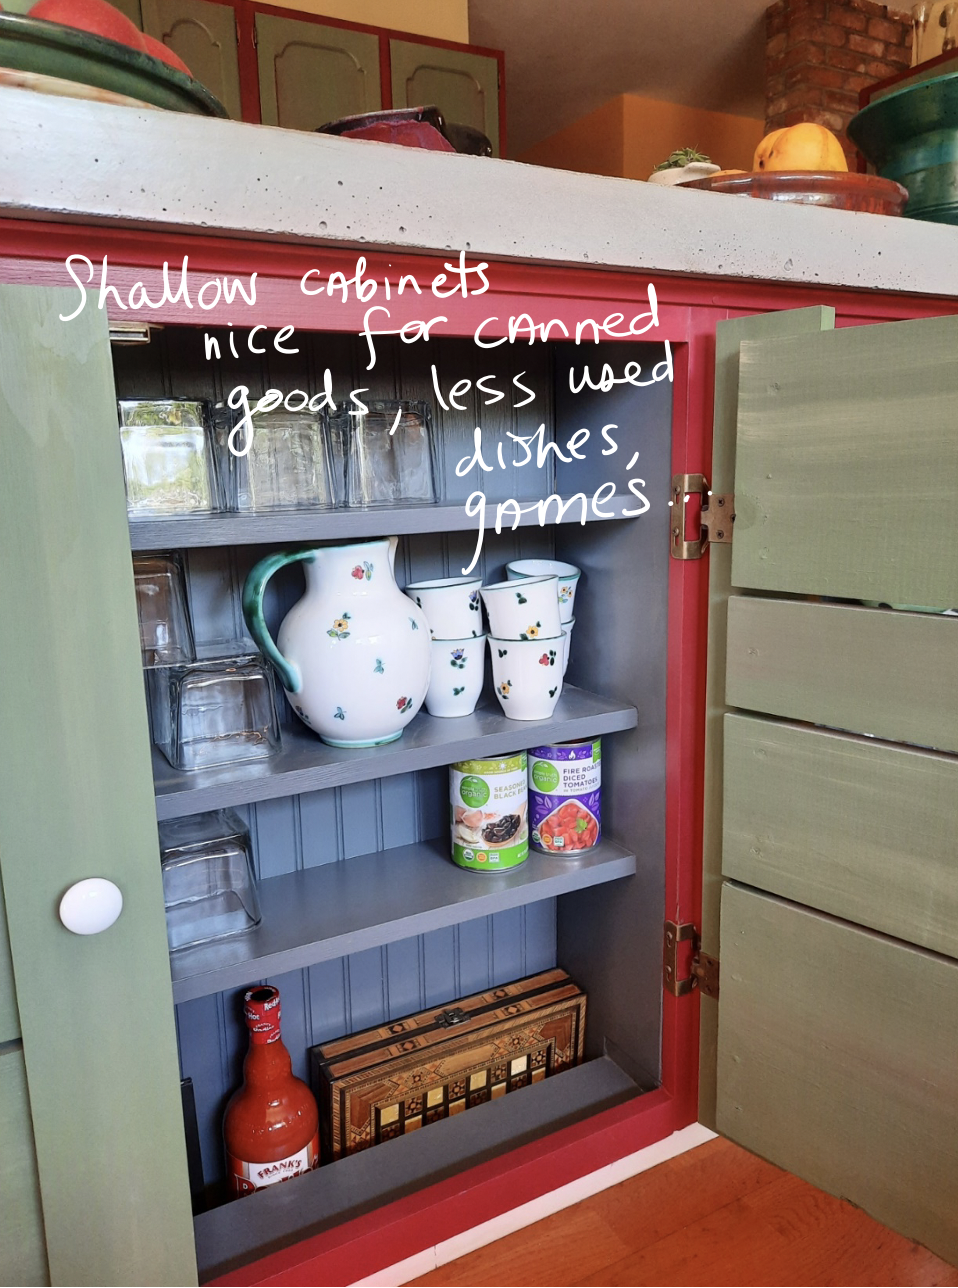 Text on image: Shallow cabinets are nice for canned goods and less used dishes, games